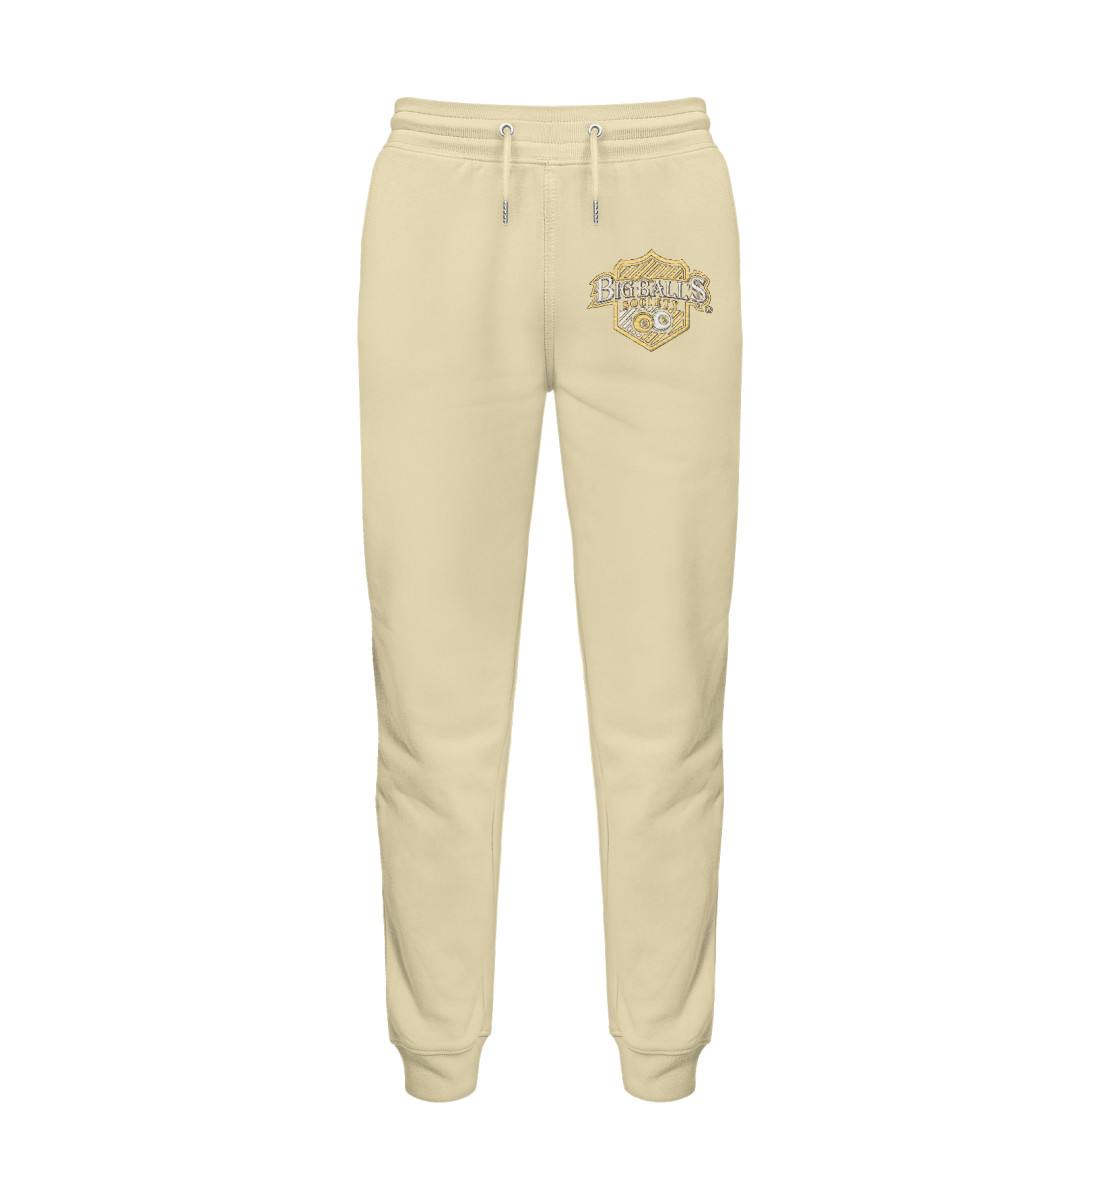 Big Ball'$ Society Premium White Gold Gestickt- Mover Jogger 